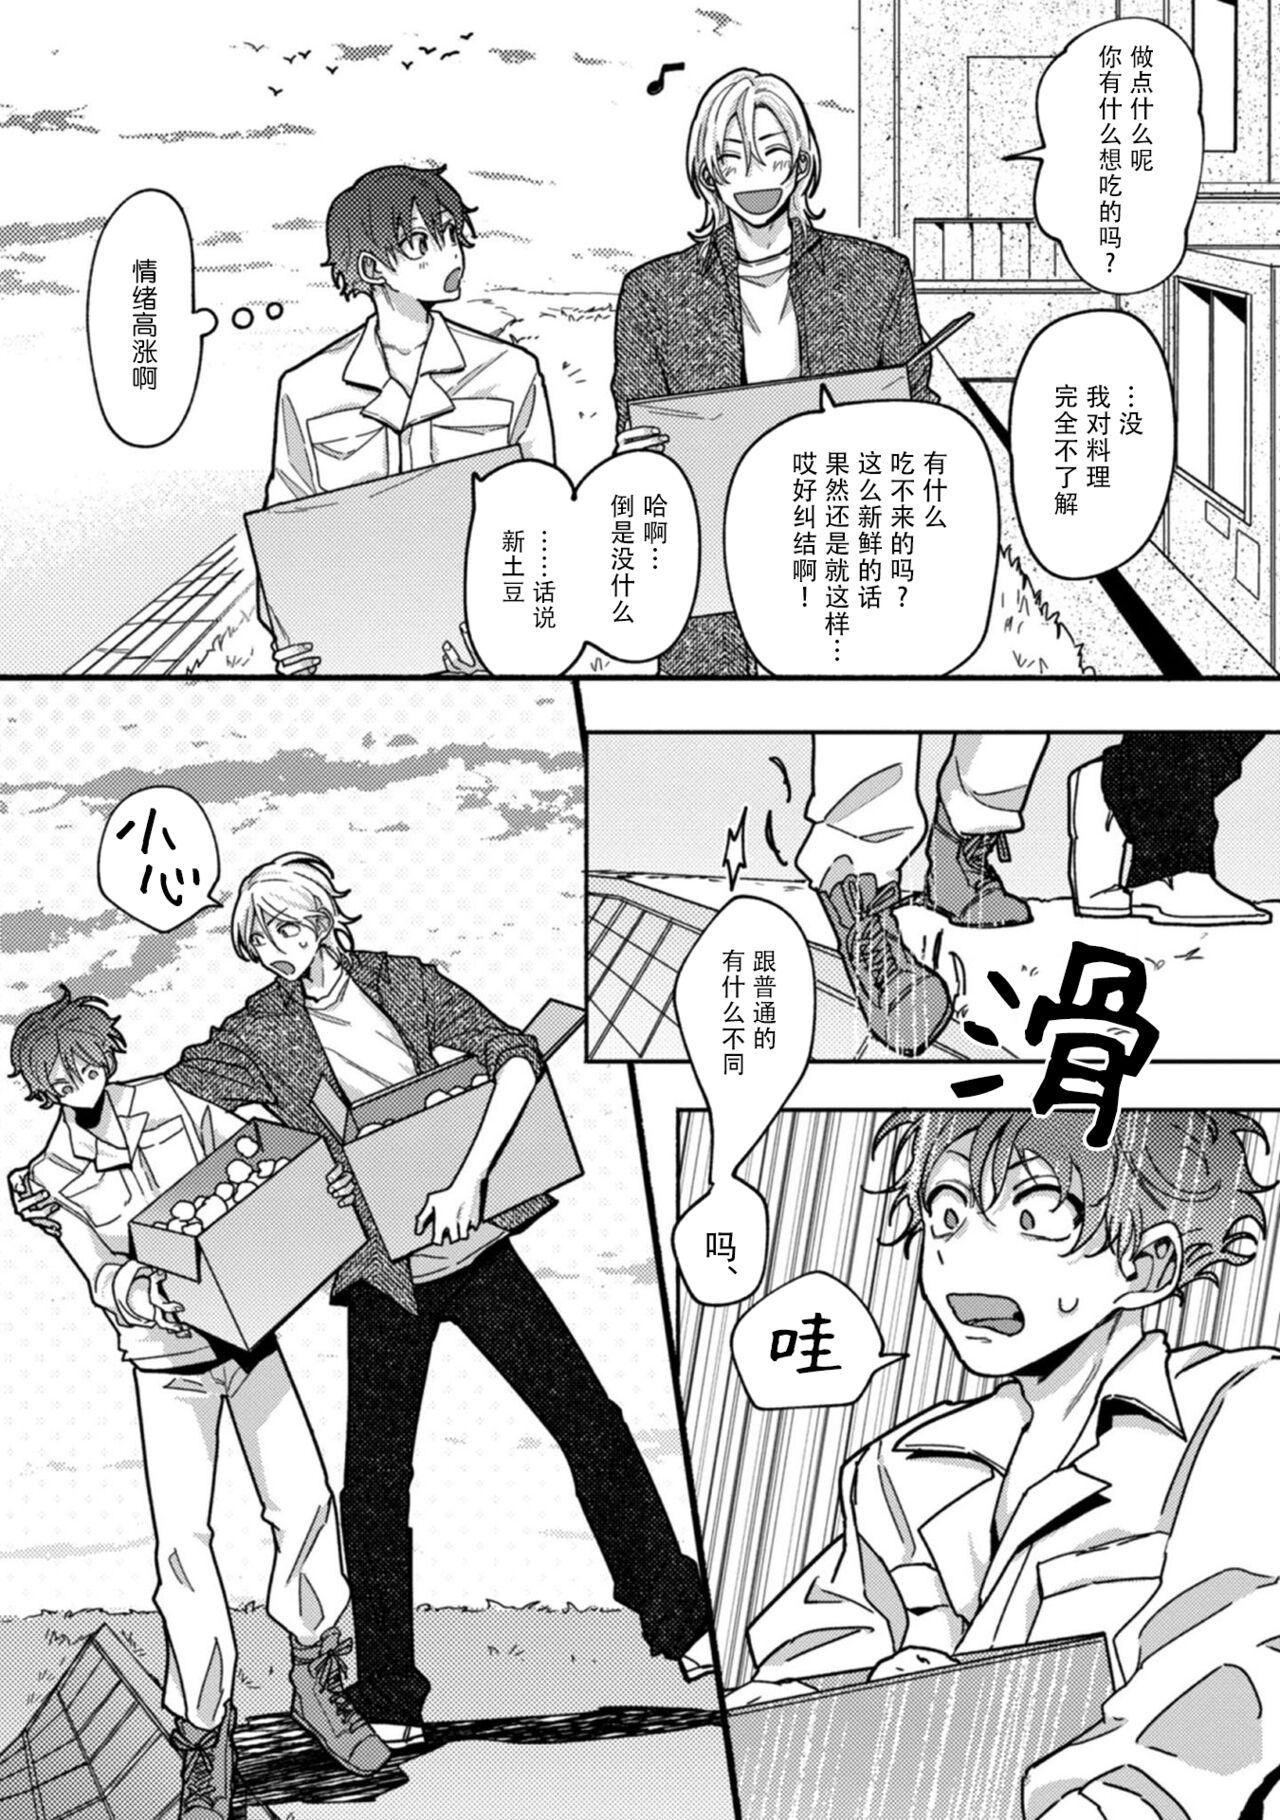 Spoon Uso to Yellowknife | 谎言与黄色小刀 2 Penis Sucking - Page 12